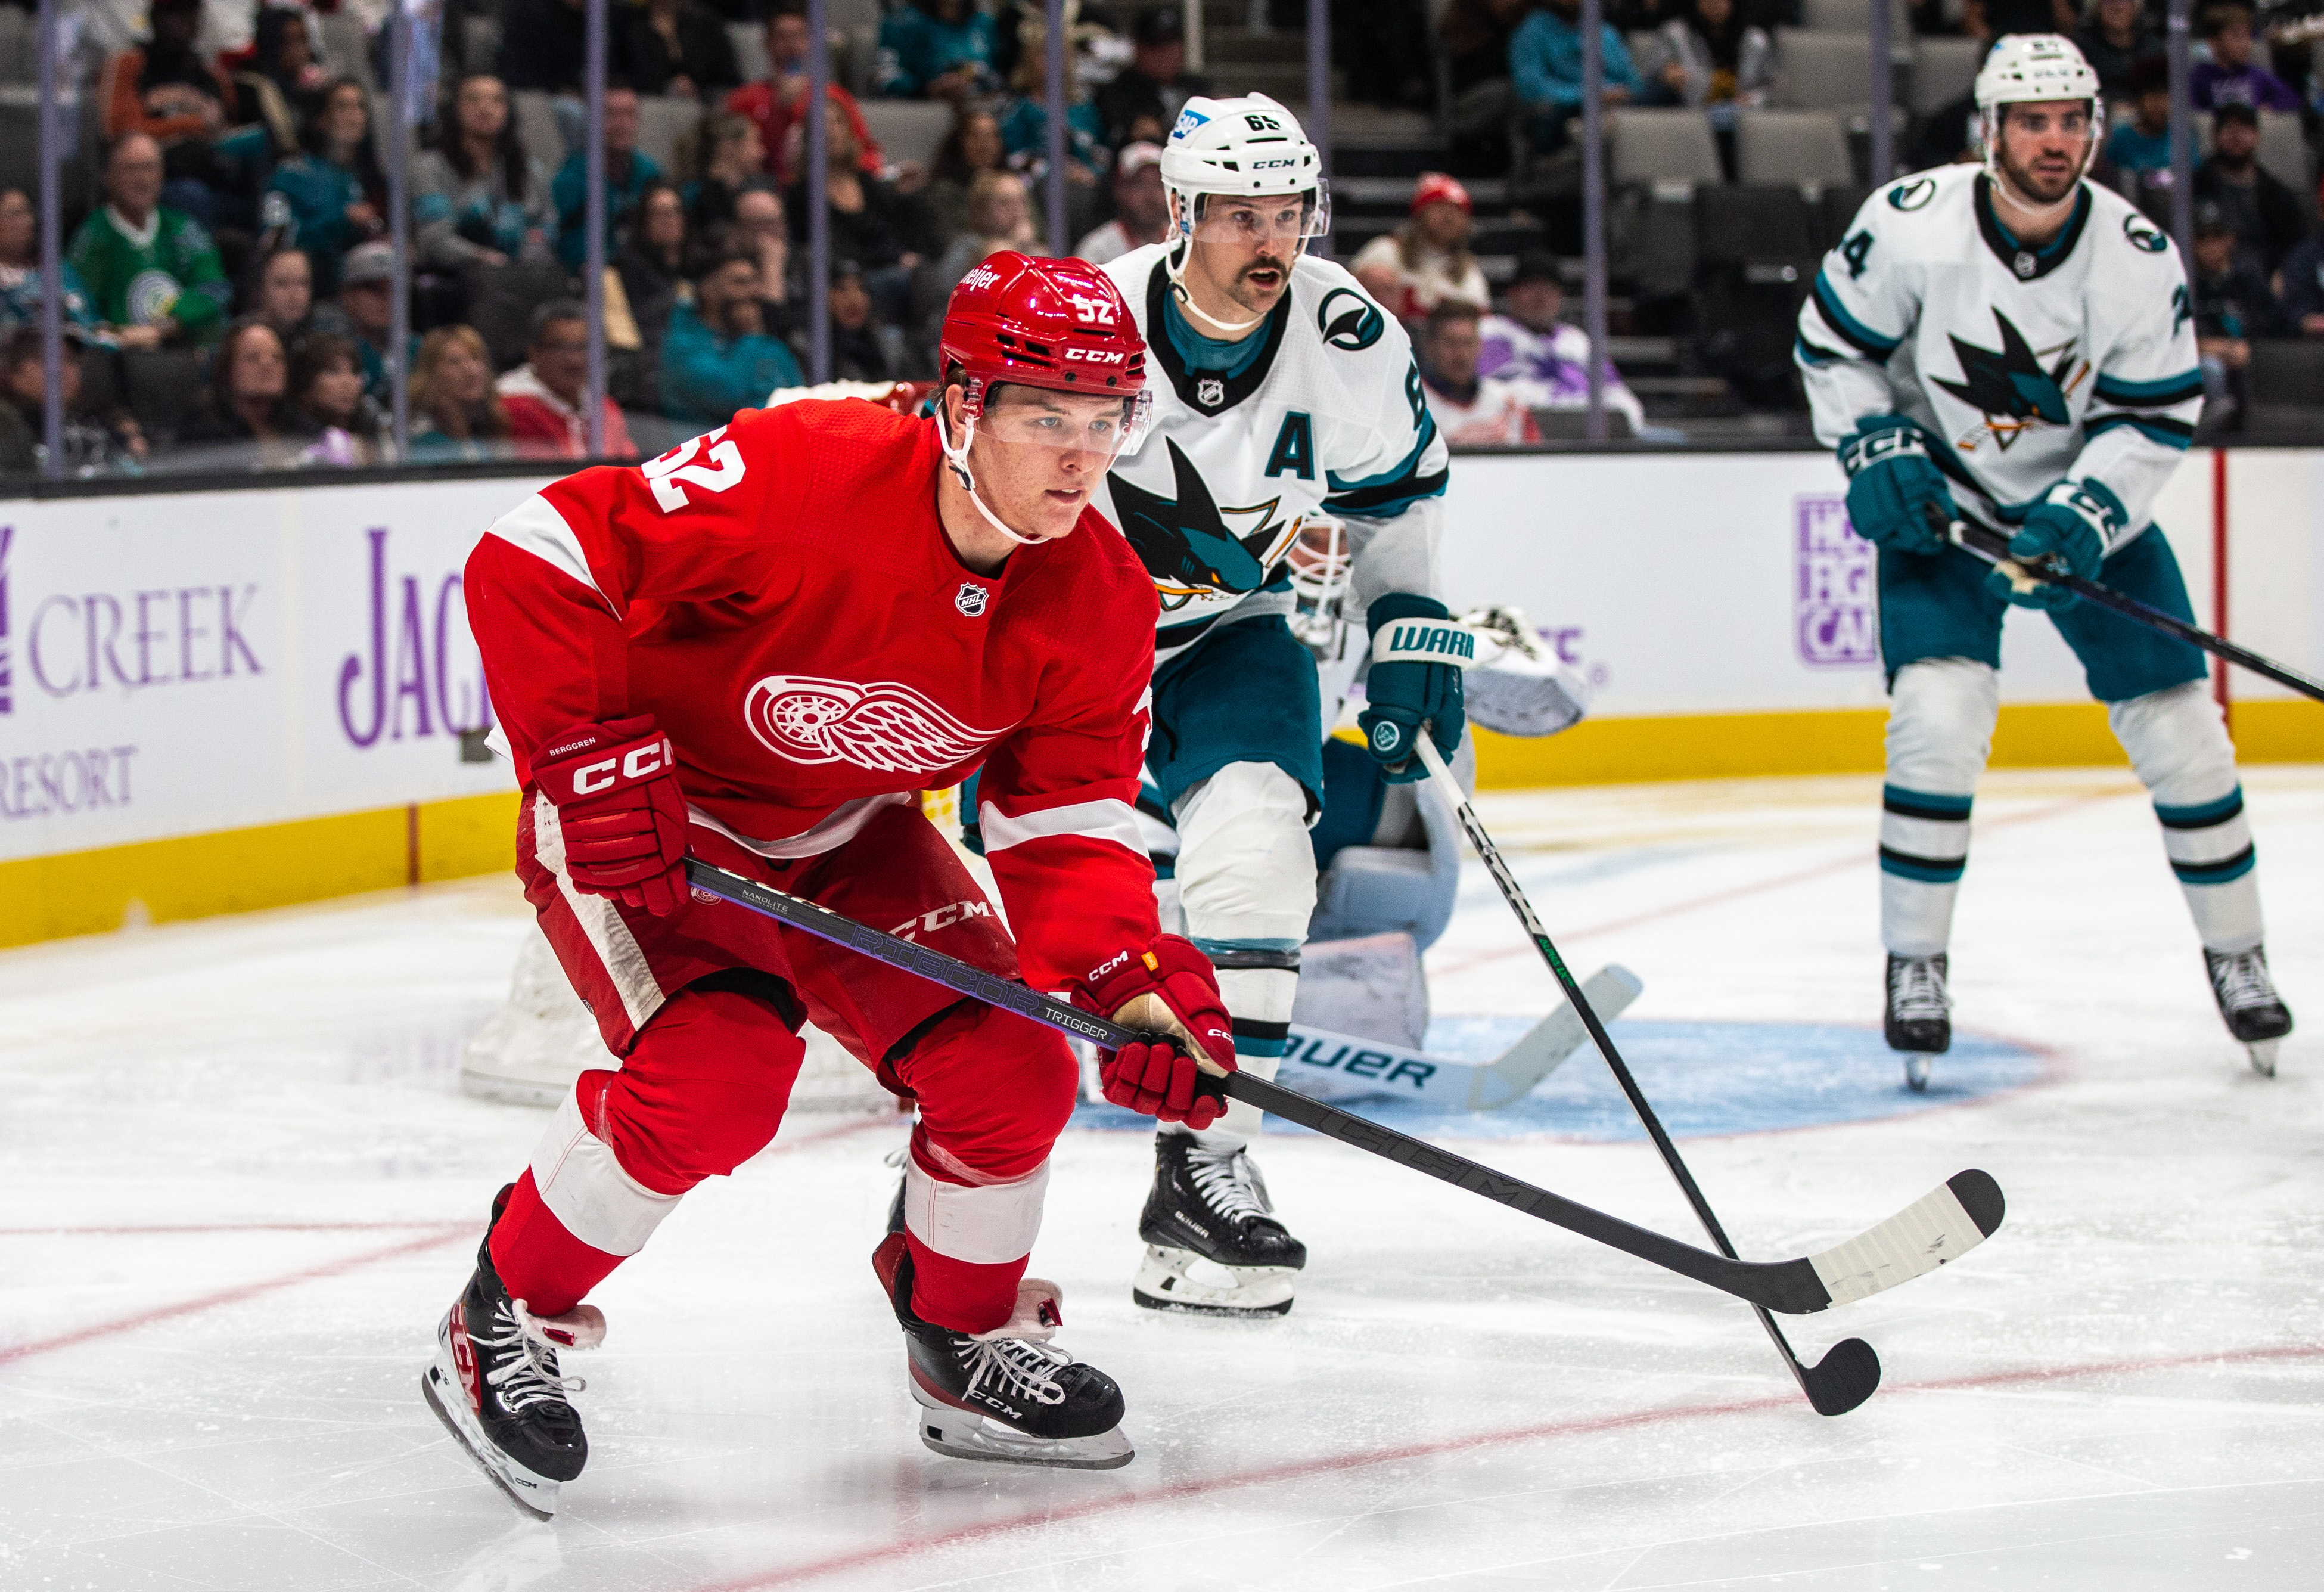 Detroit Red Wings Left Wing Jonatan Berggren (52) follows the action during the third period of a regular season NHL hockey game between the Detroit Red Wings and the San Jose Sharks on November 17, 2022, at SAP Center, in San Jose, CA.